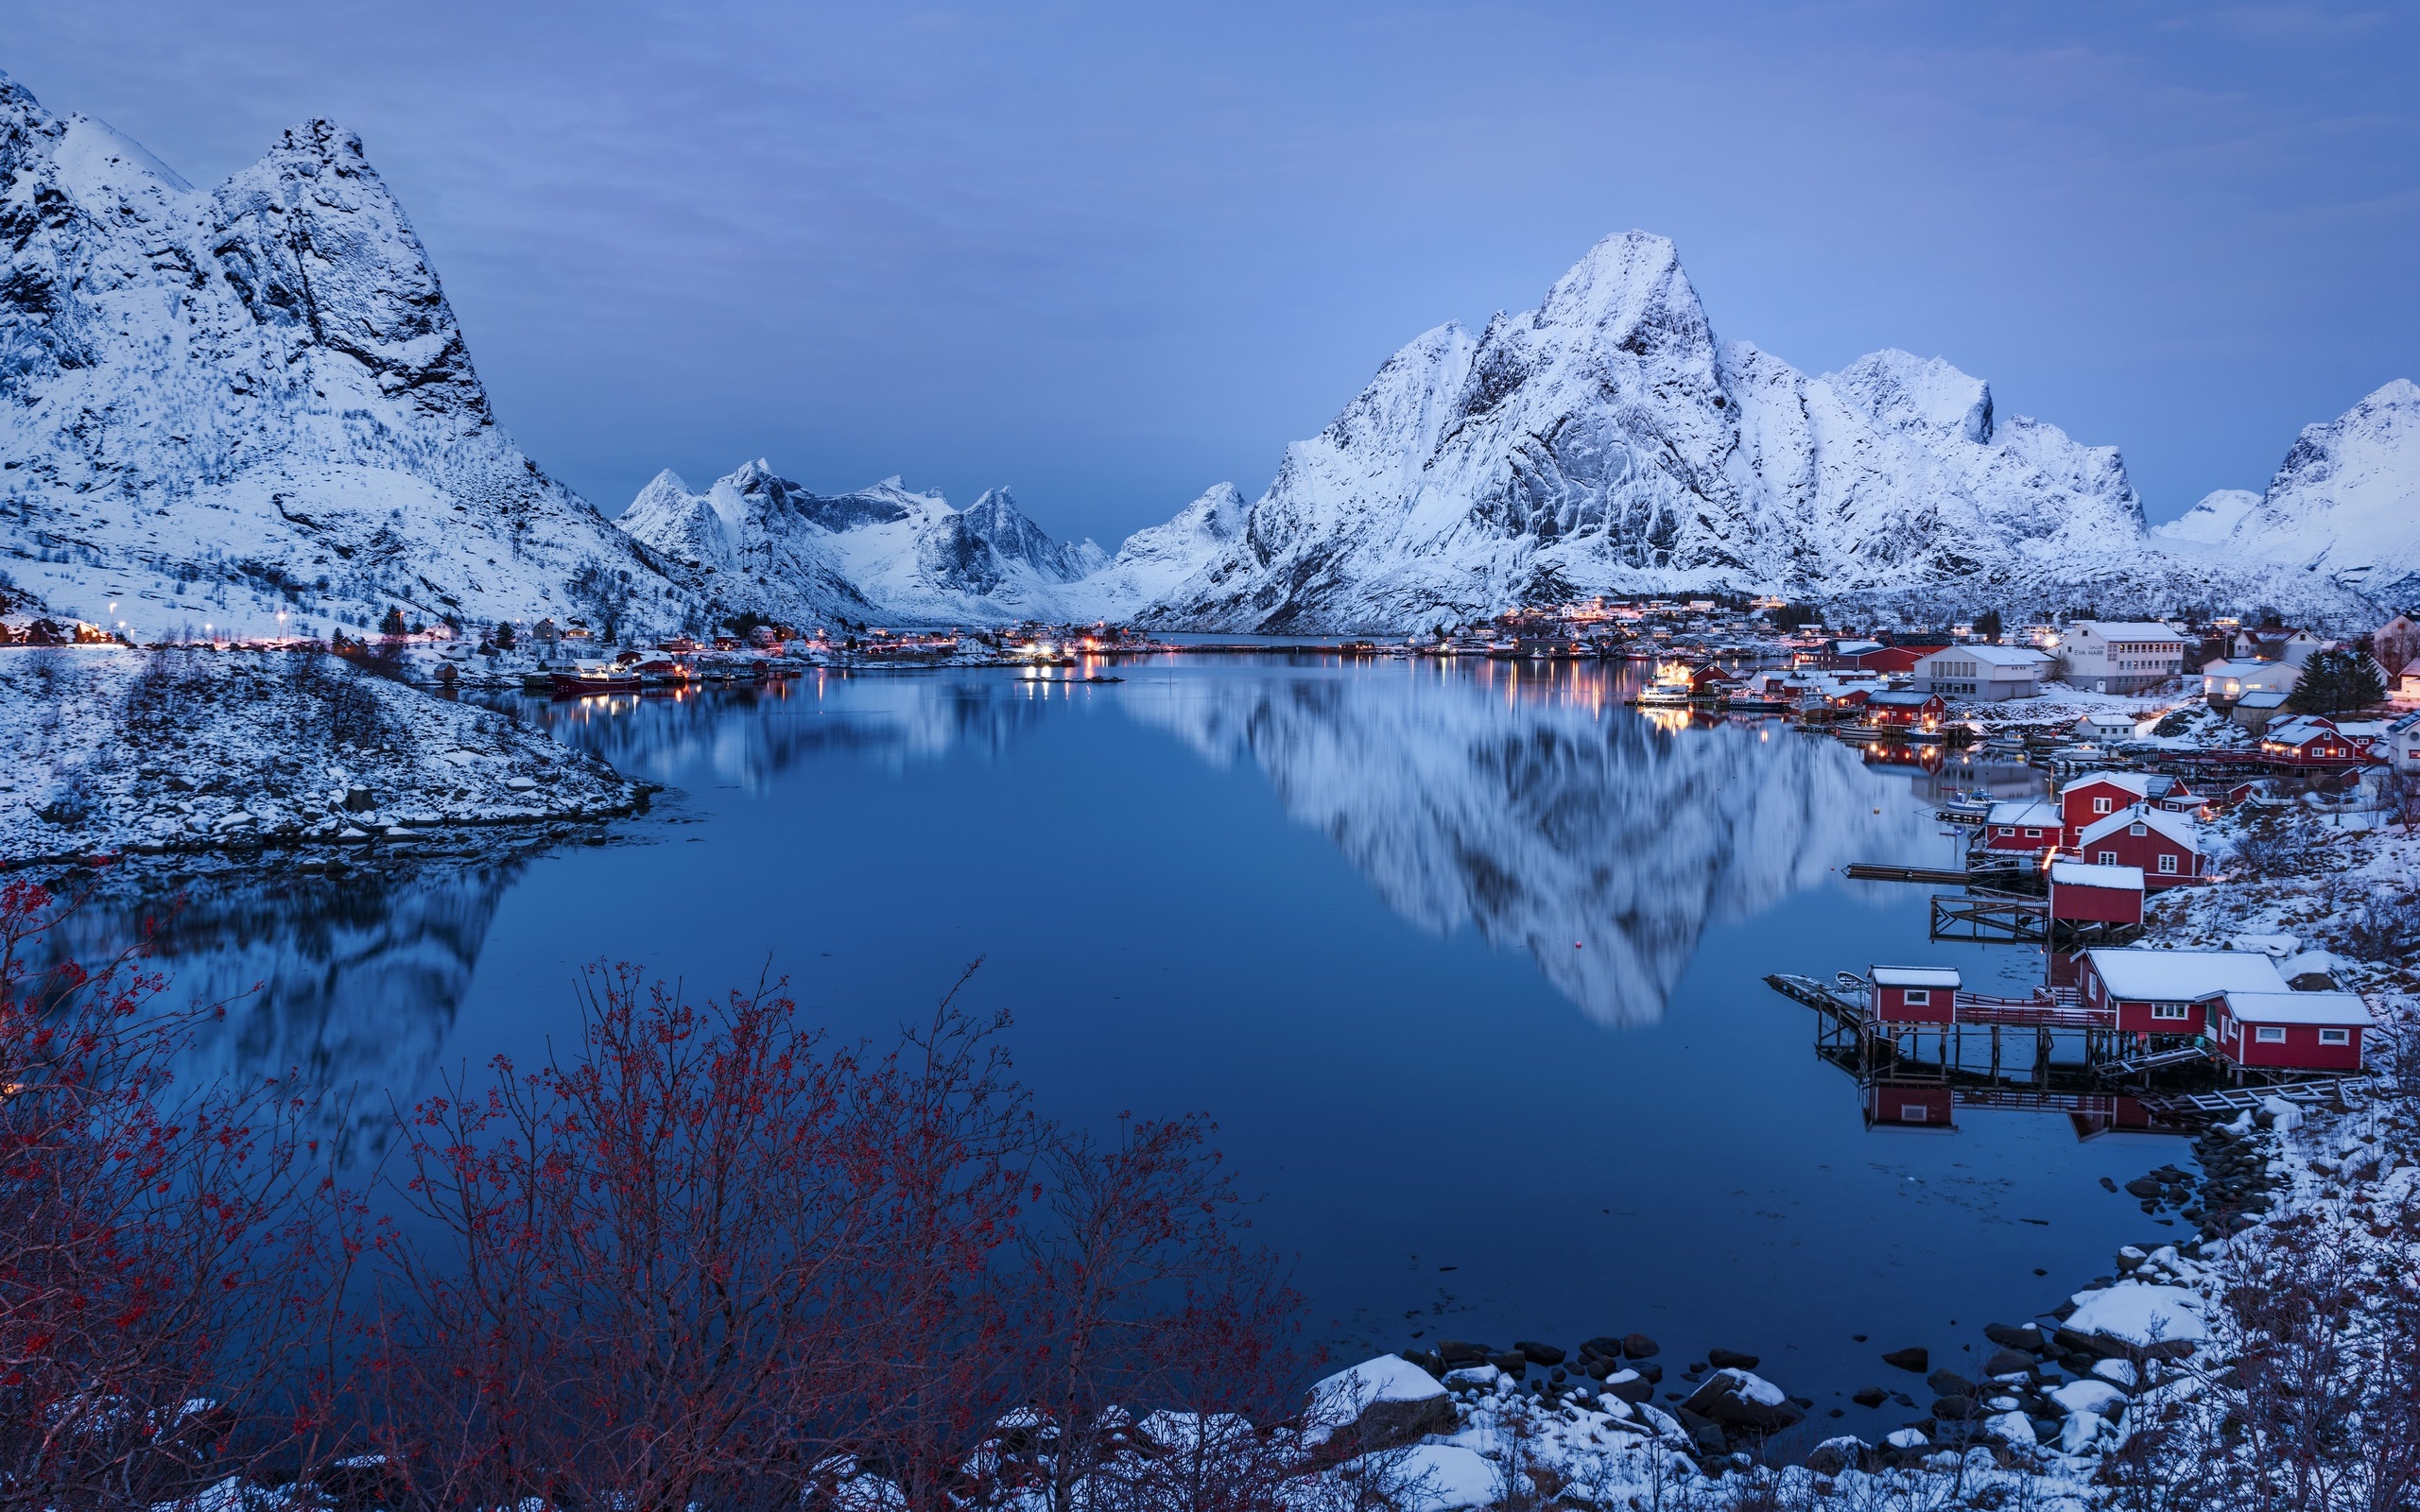 General 2560x1600 nature blue Norway mountains landscape snow lake calm reflection